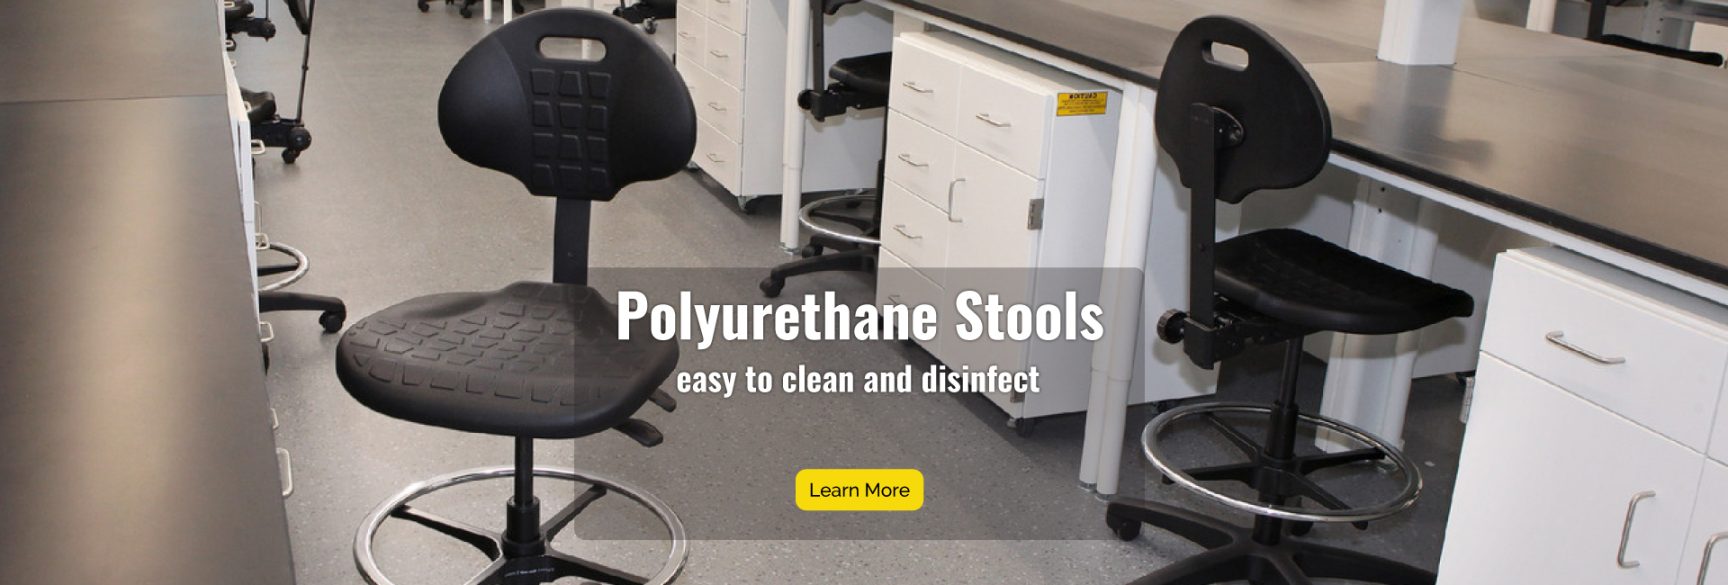 Polyrurethane Stools are easy to clean and disinfect